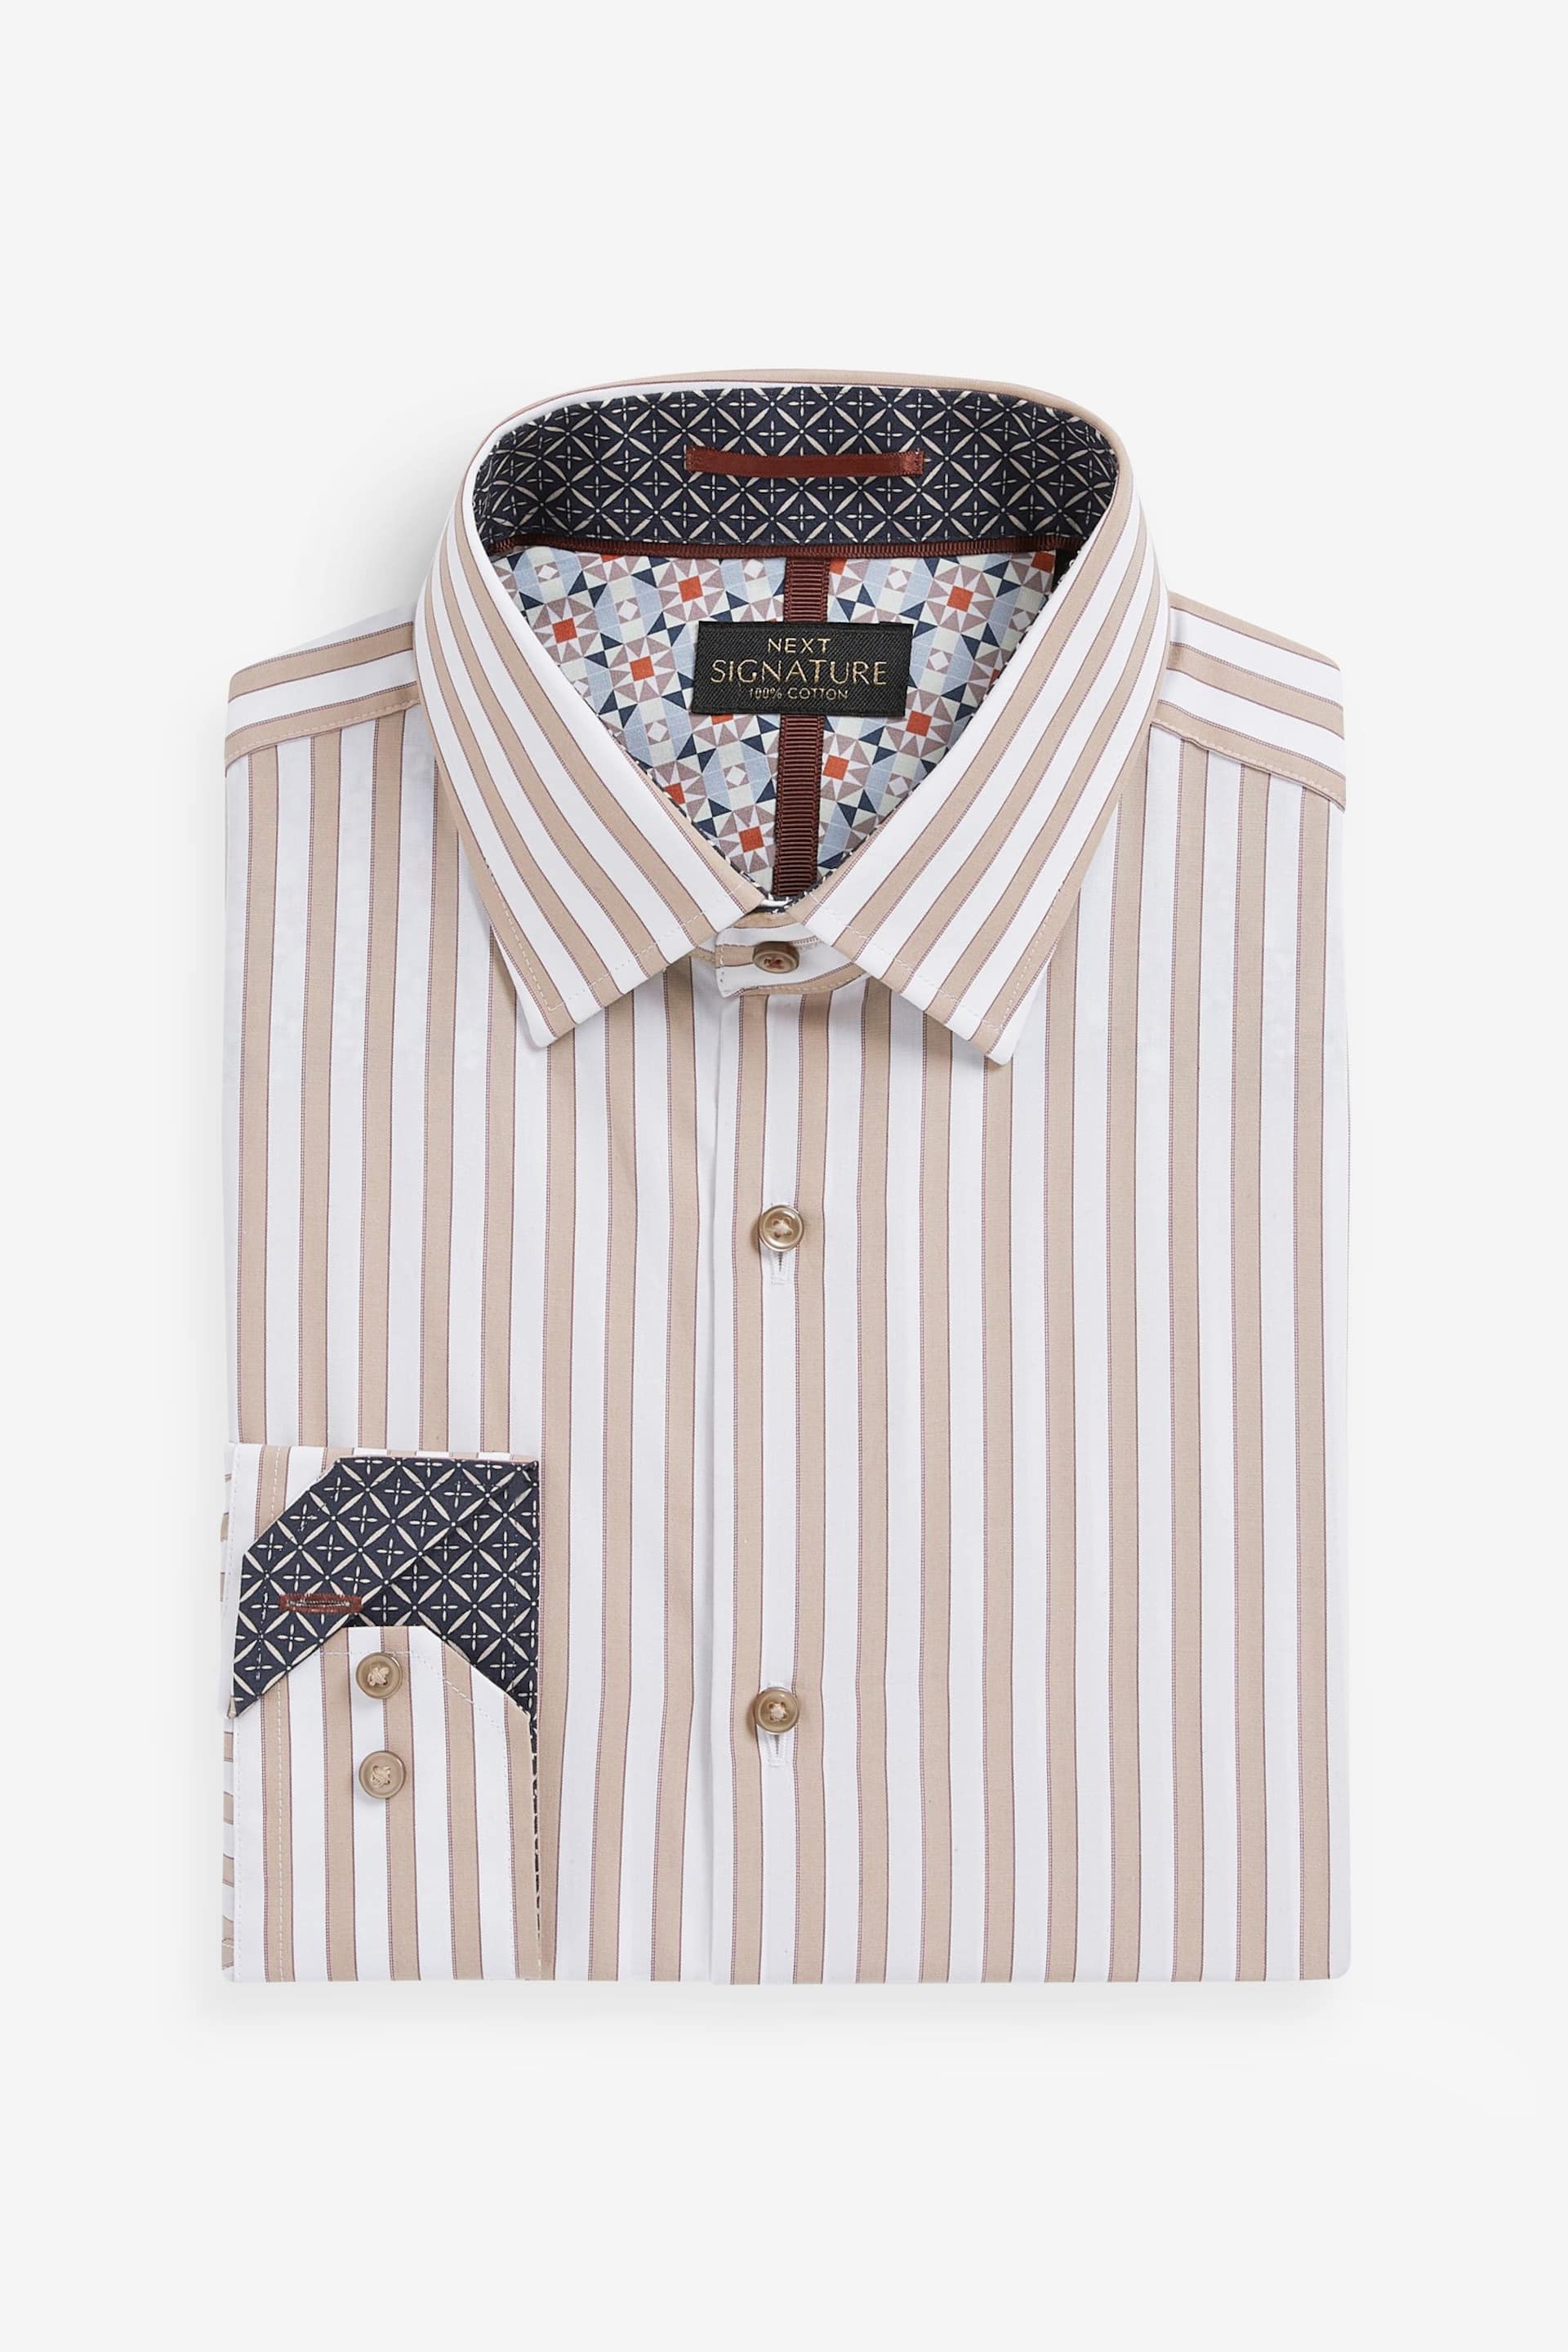 Neutral Brown/White Stripe Signature Trimmed Shirt - Image 7 of 9